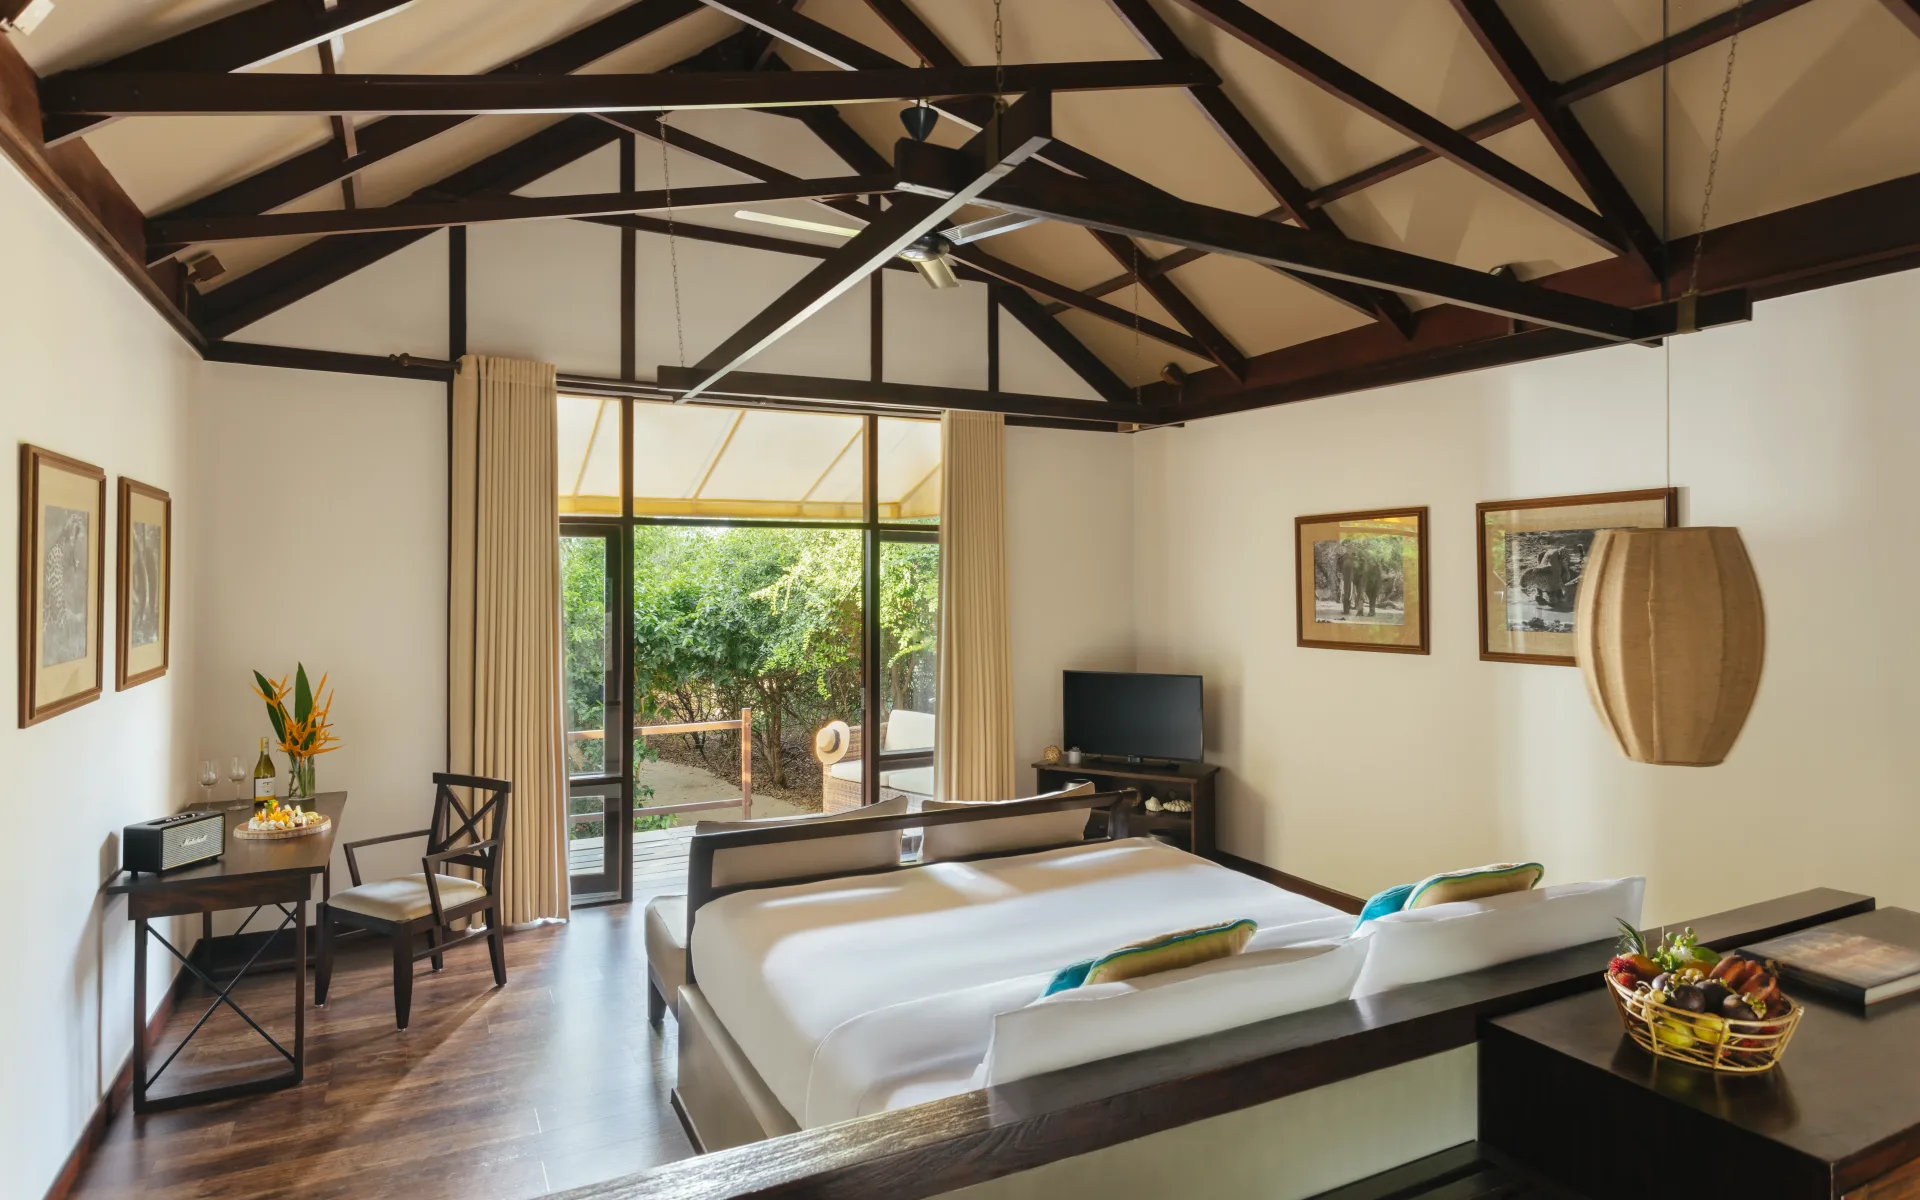 The Beach Cabins at Jungle Beach are open-spaced with wooden beams on the ceiling, decorated in a sleek and subtle style.